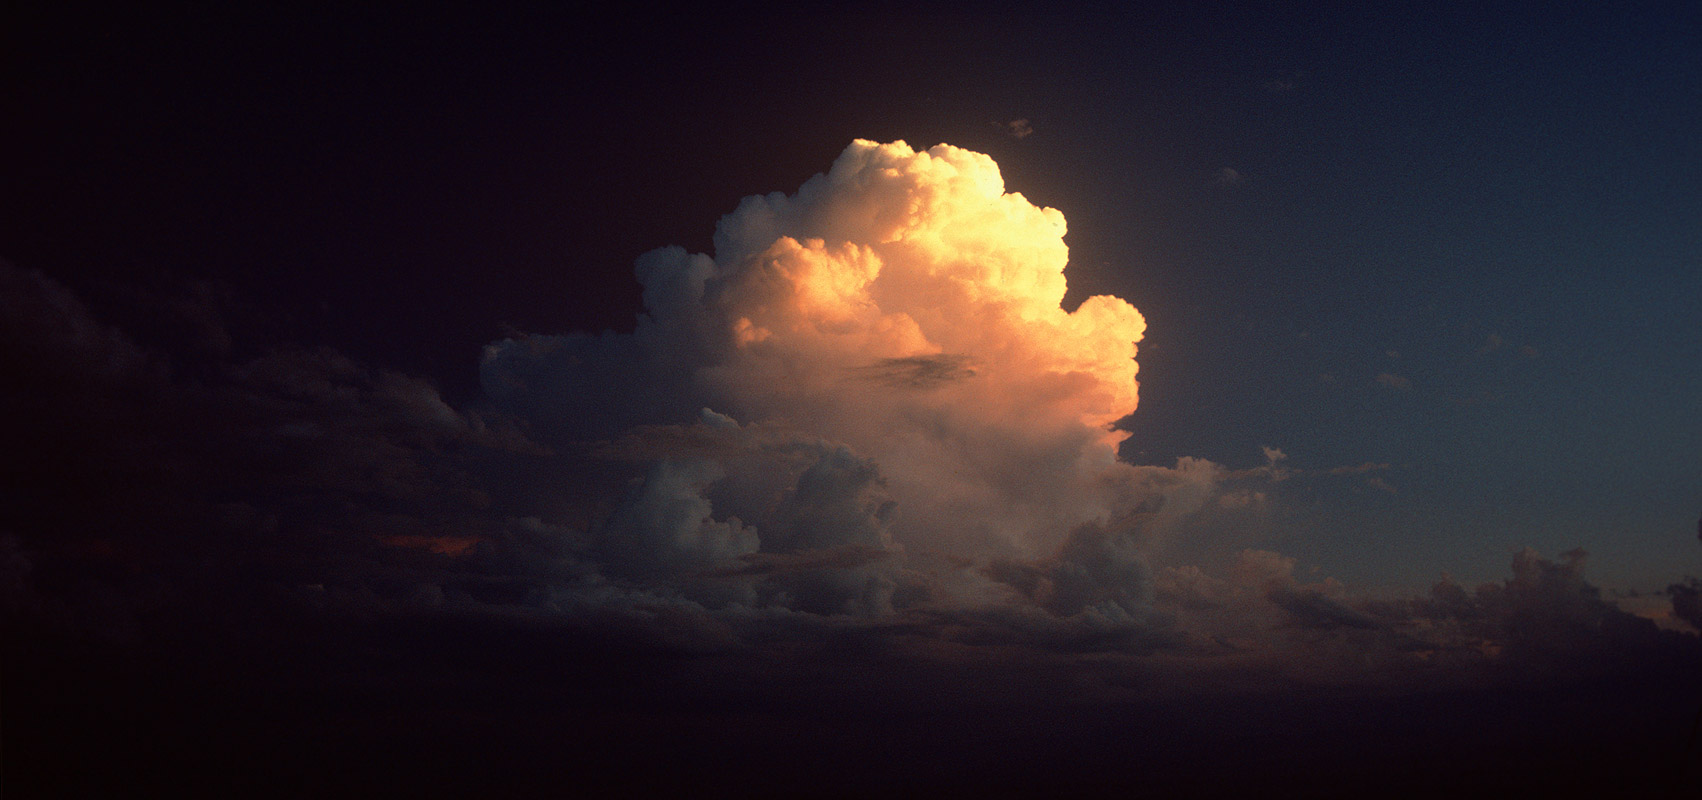 Thunderheads catching the rays of the setting sun over Dal LakeCanon A1, 50mm, Kodachrome 64